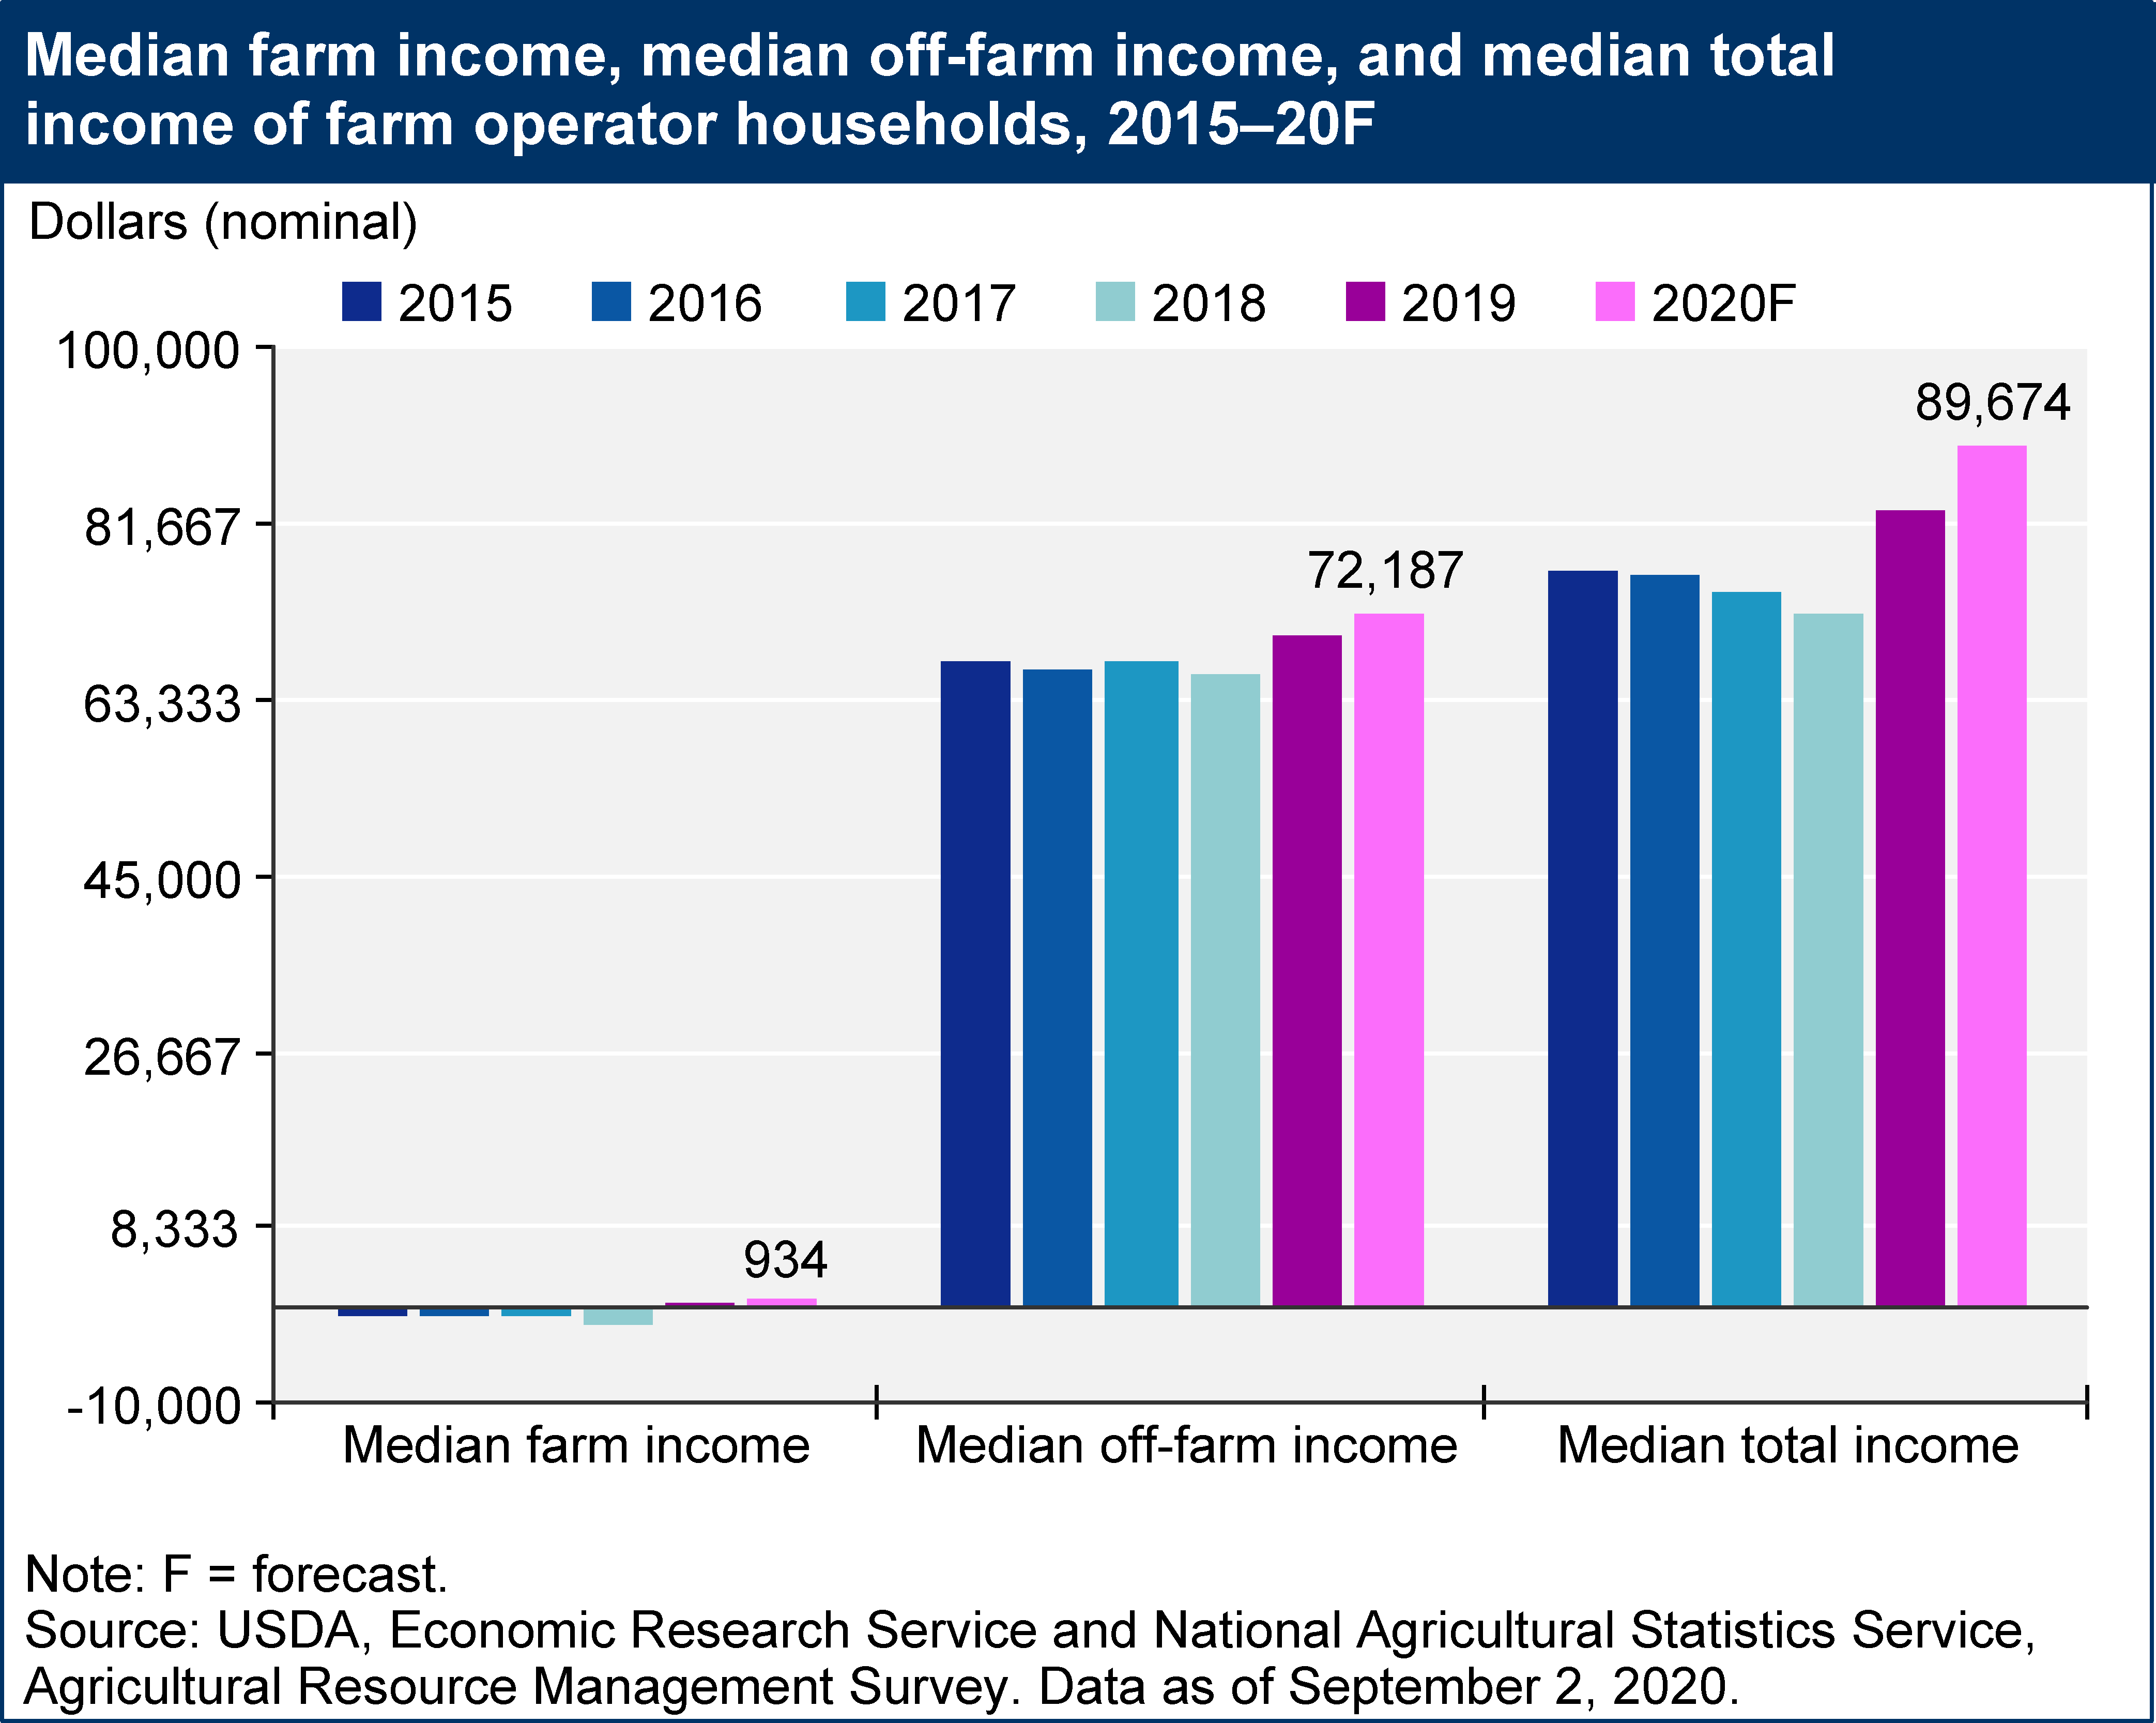 Source: USDA, Economic Research Service and National Agricultural Statistics Service, Agricultural Resource Management Survey.